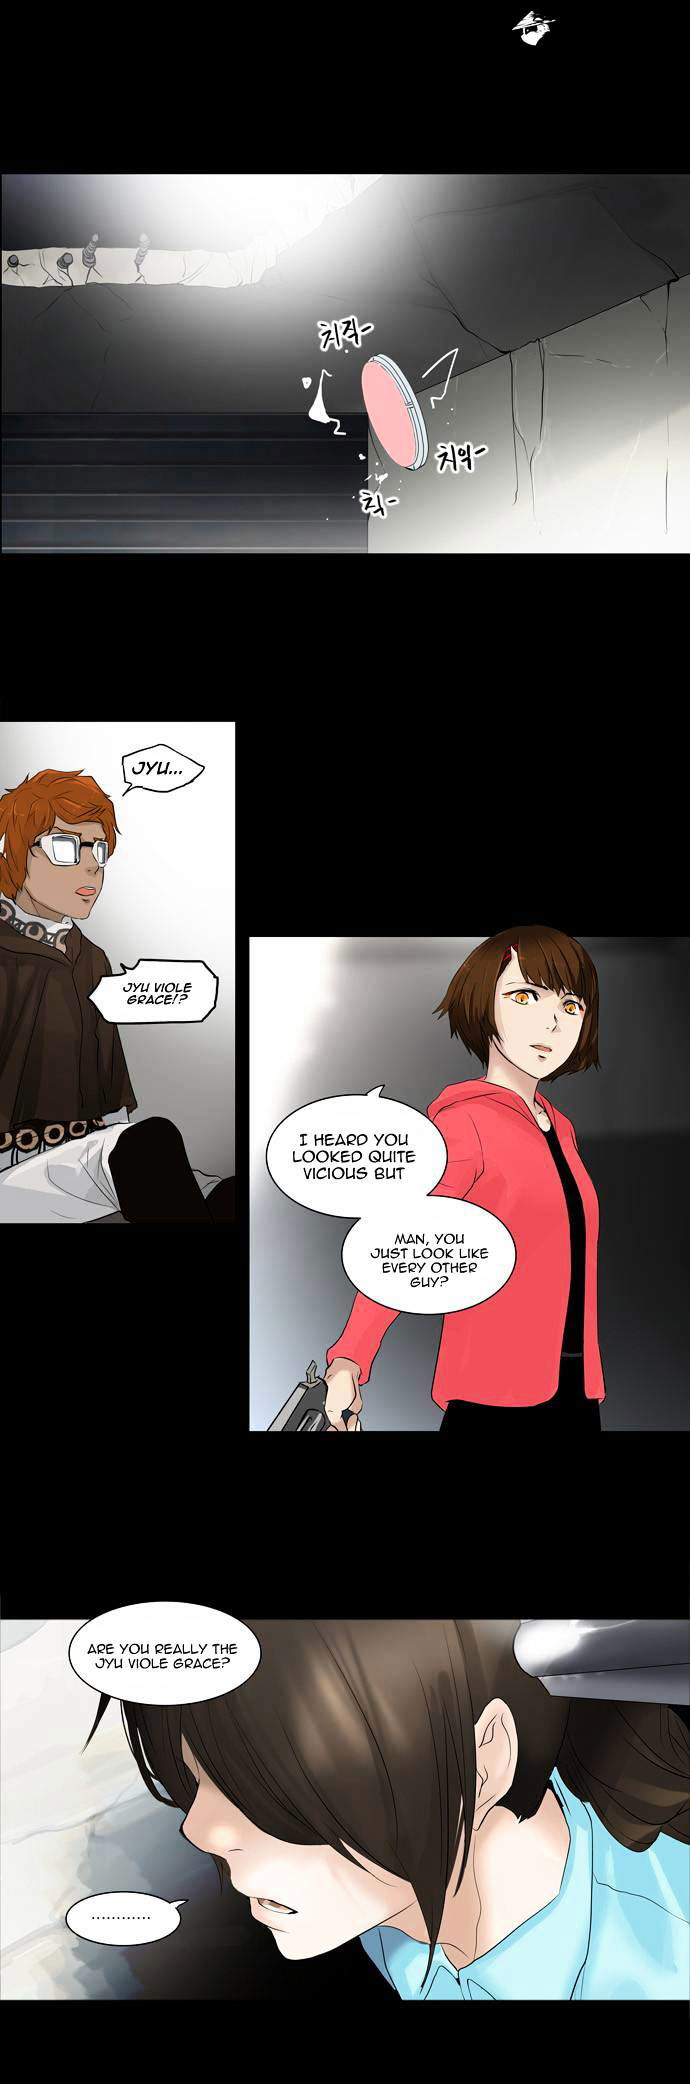 Tower of God Chapter 140 page 1